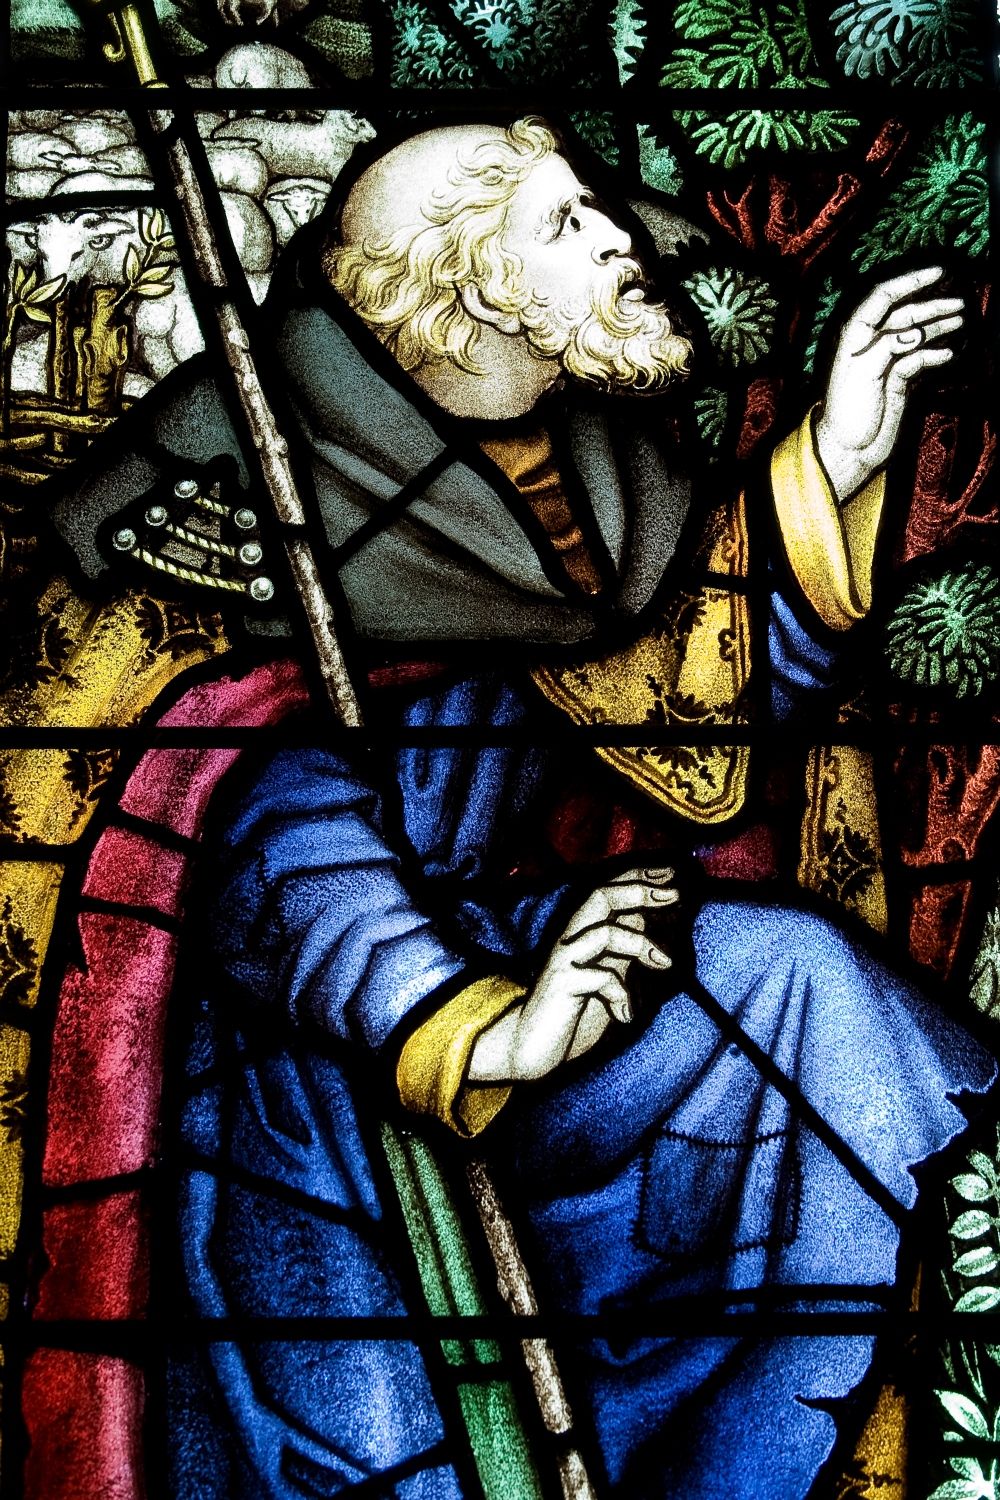 A shepherd in the Bethlehem Chapel in the crypt.